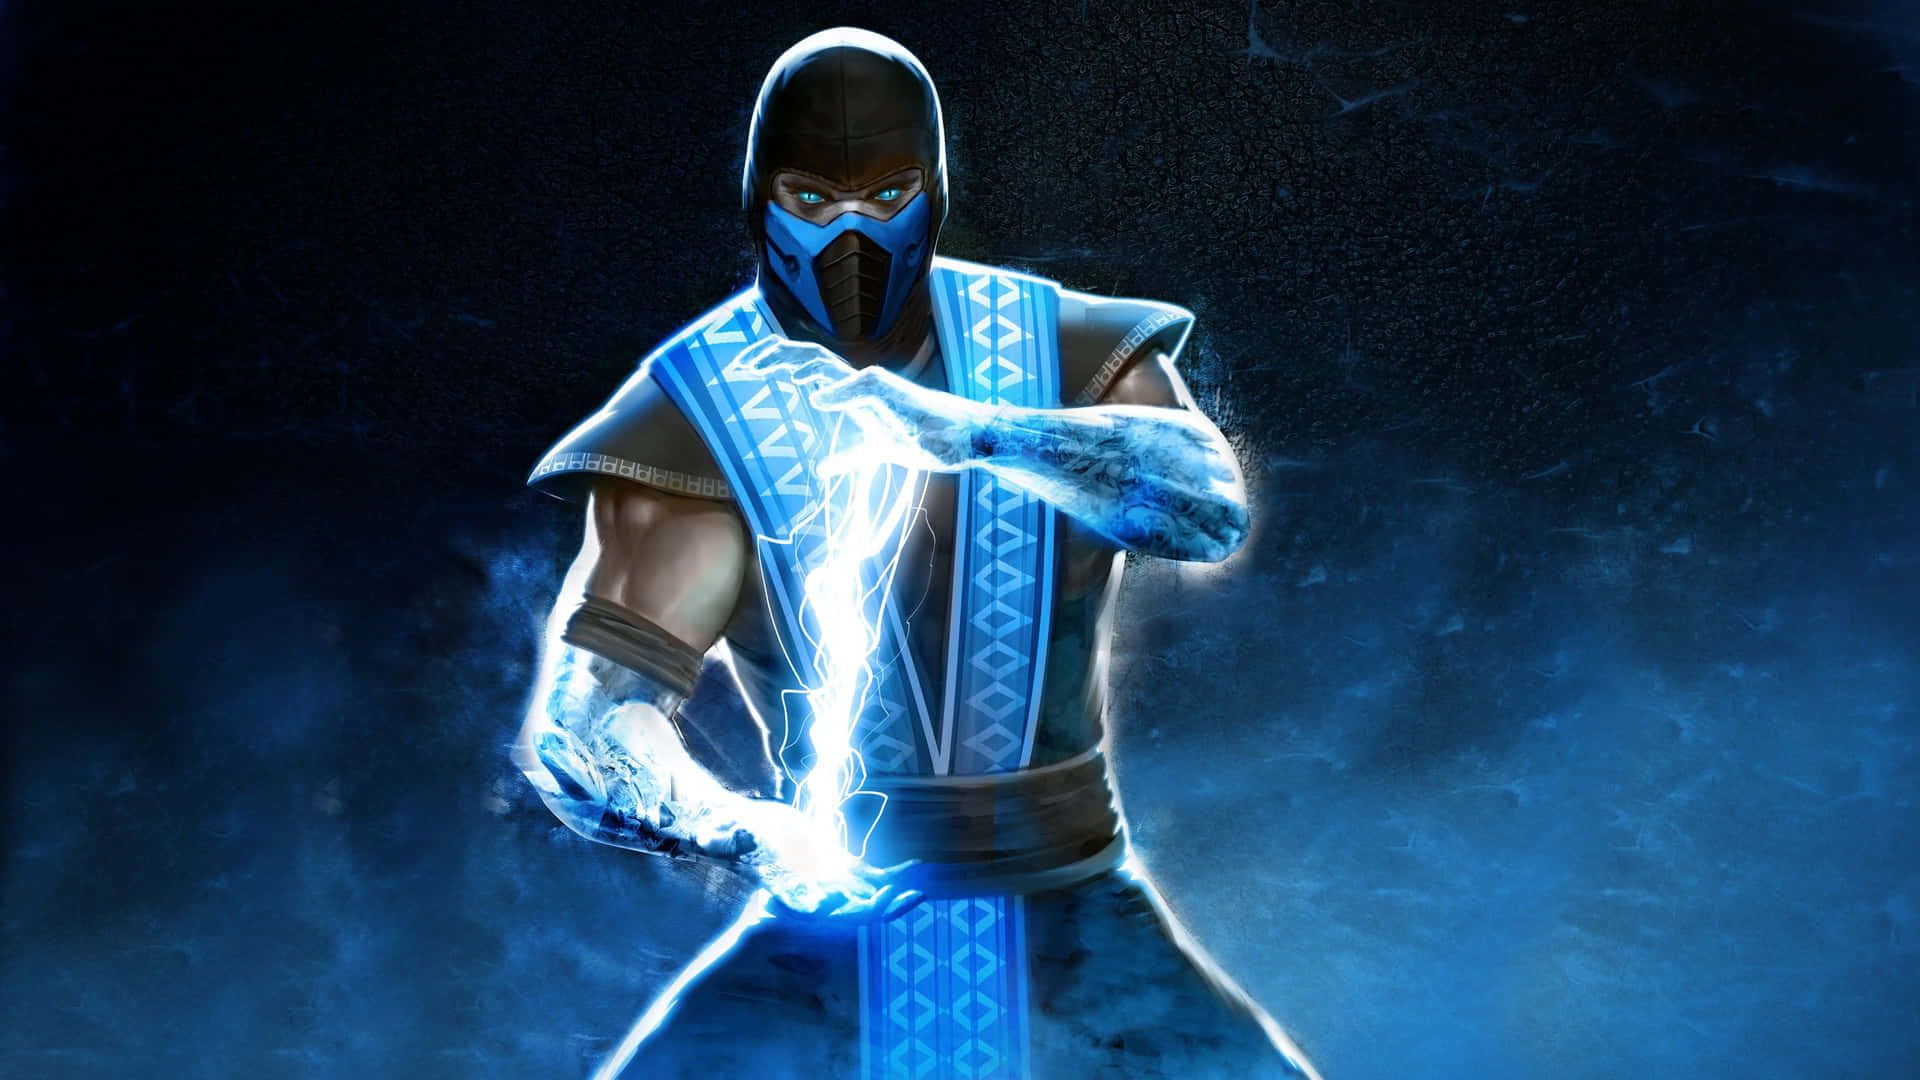 Take Your Best Shot in the Arena of Mortal Kombat